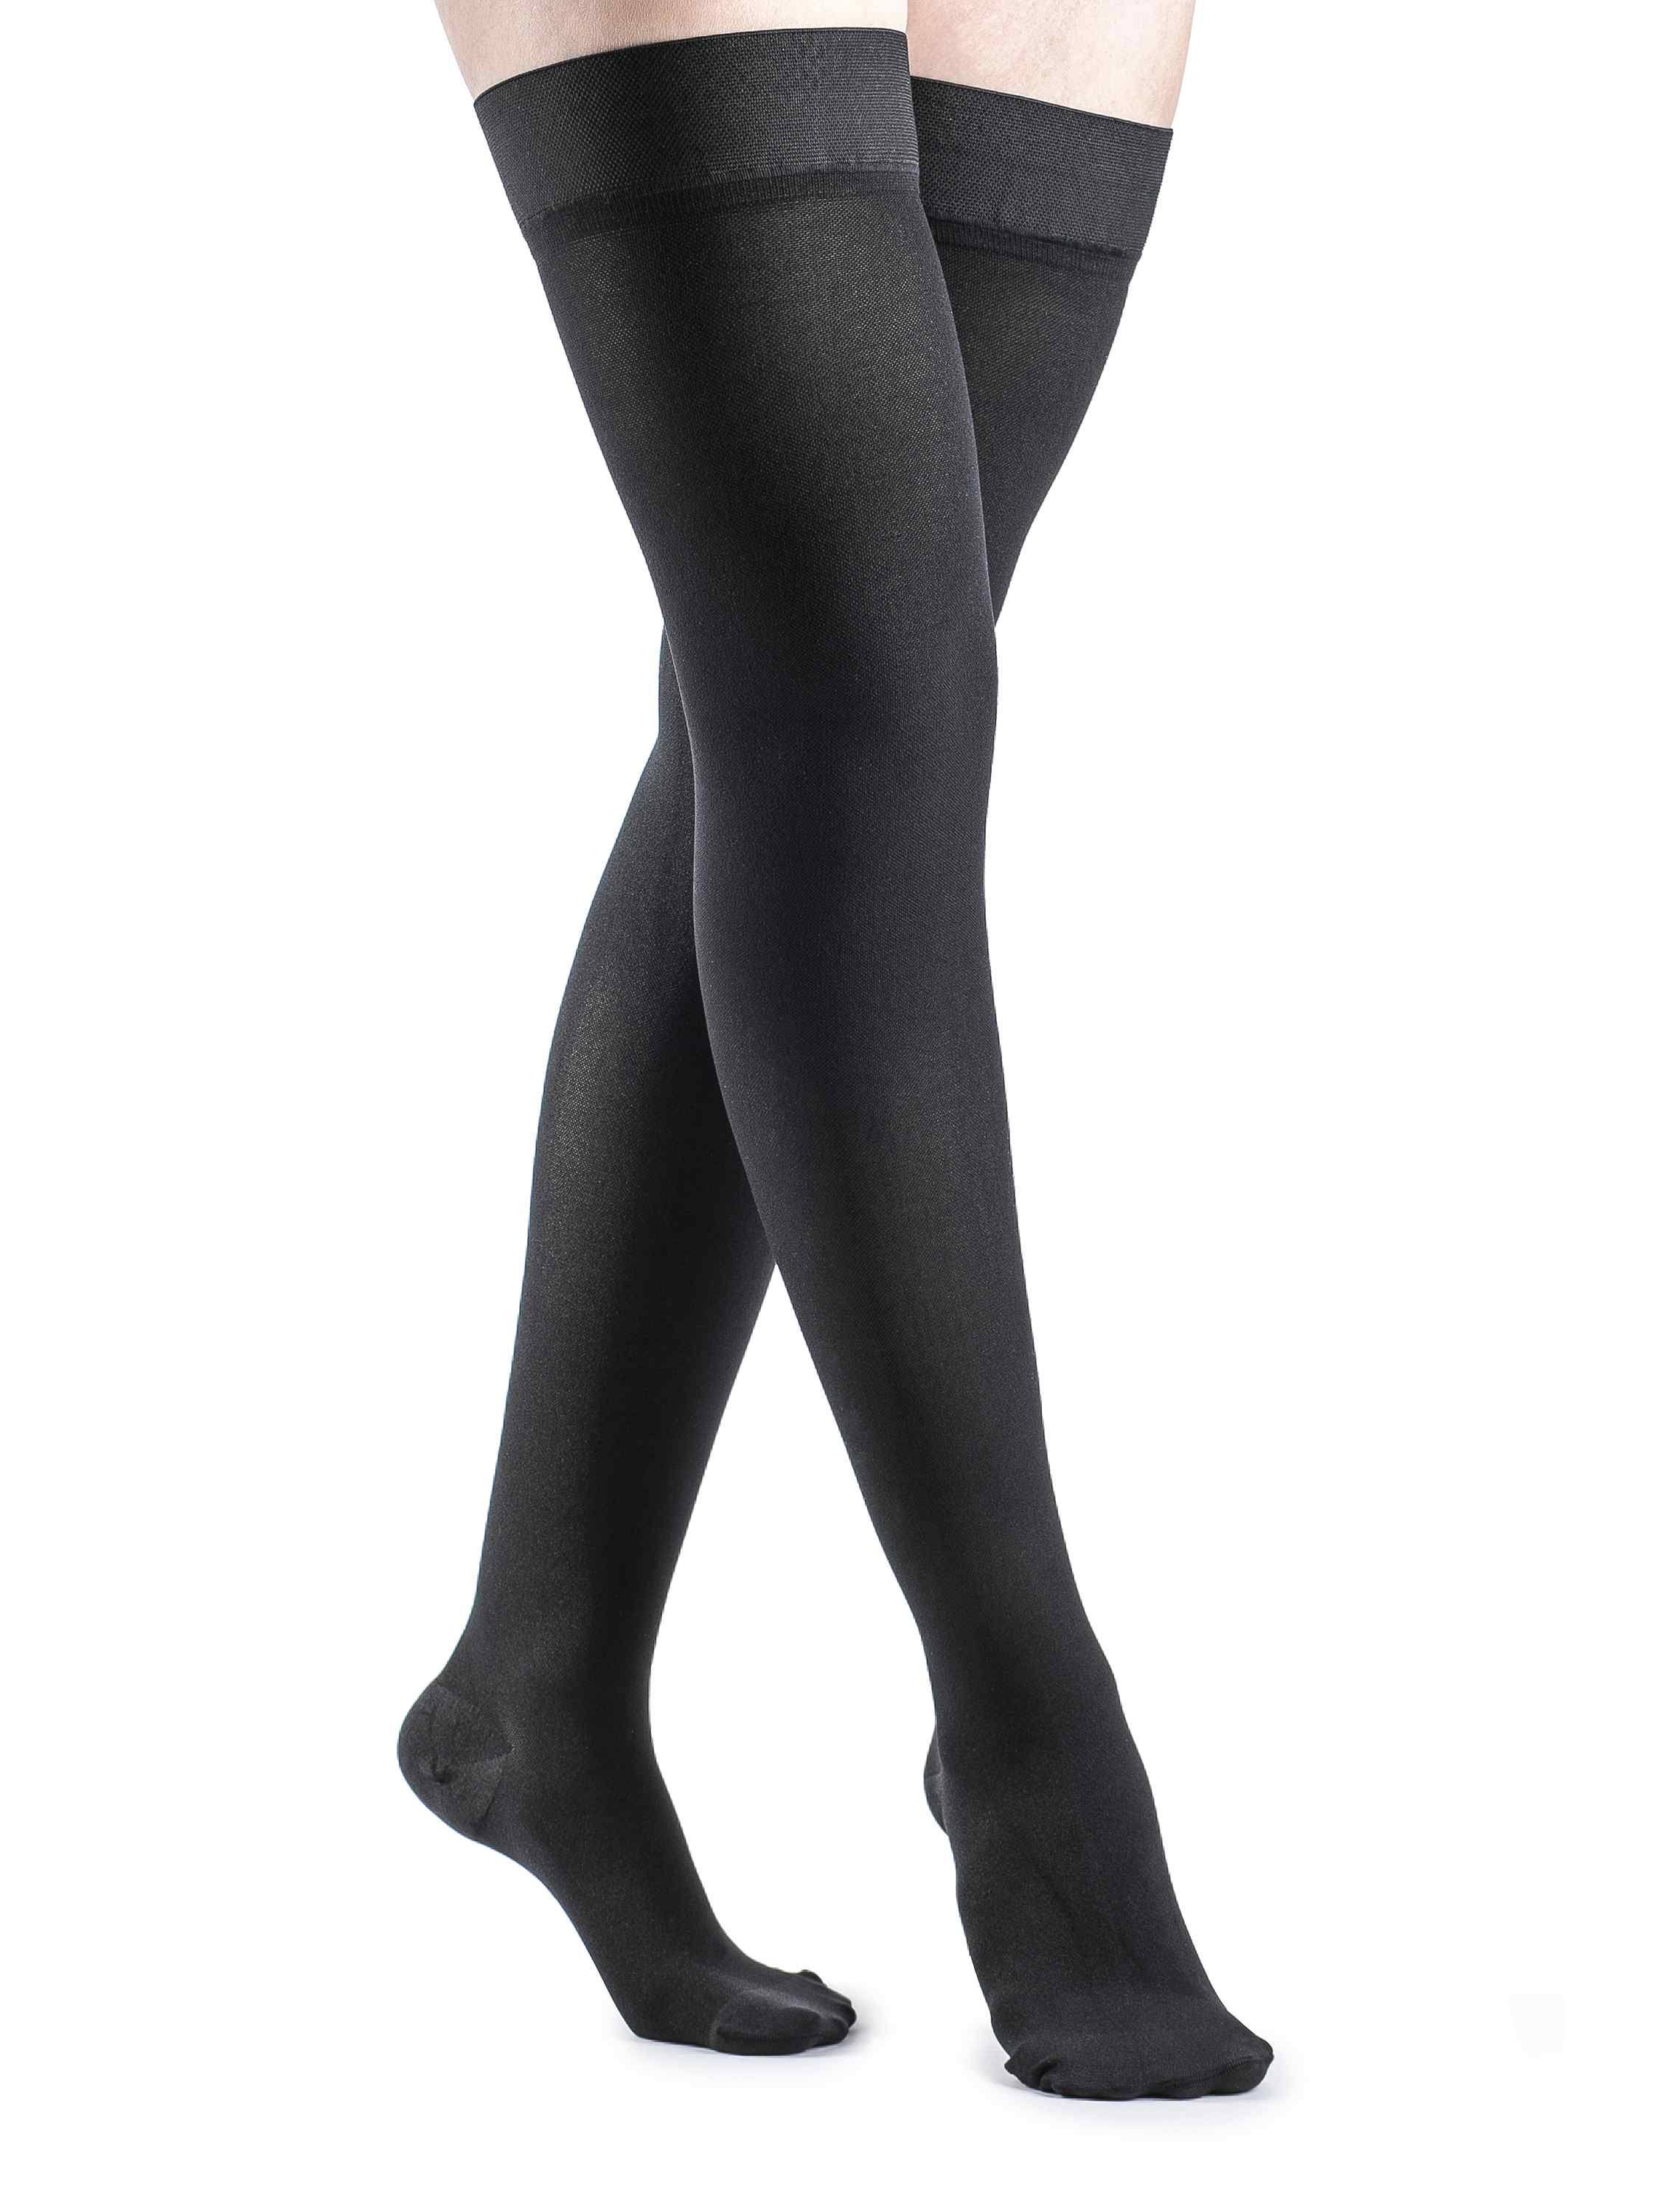 Sigvaris Women's Soft Opaque Compression Thigh High - Black, Large, 20-30mmHg